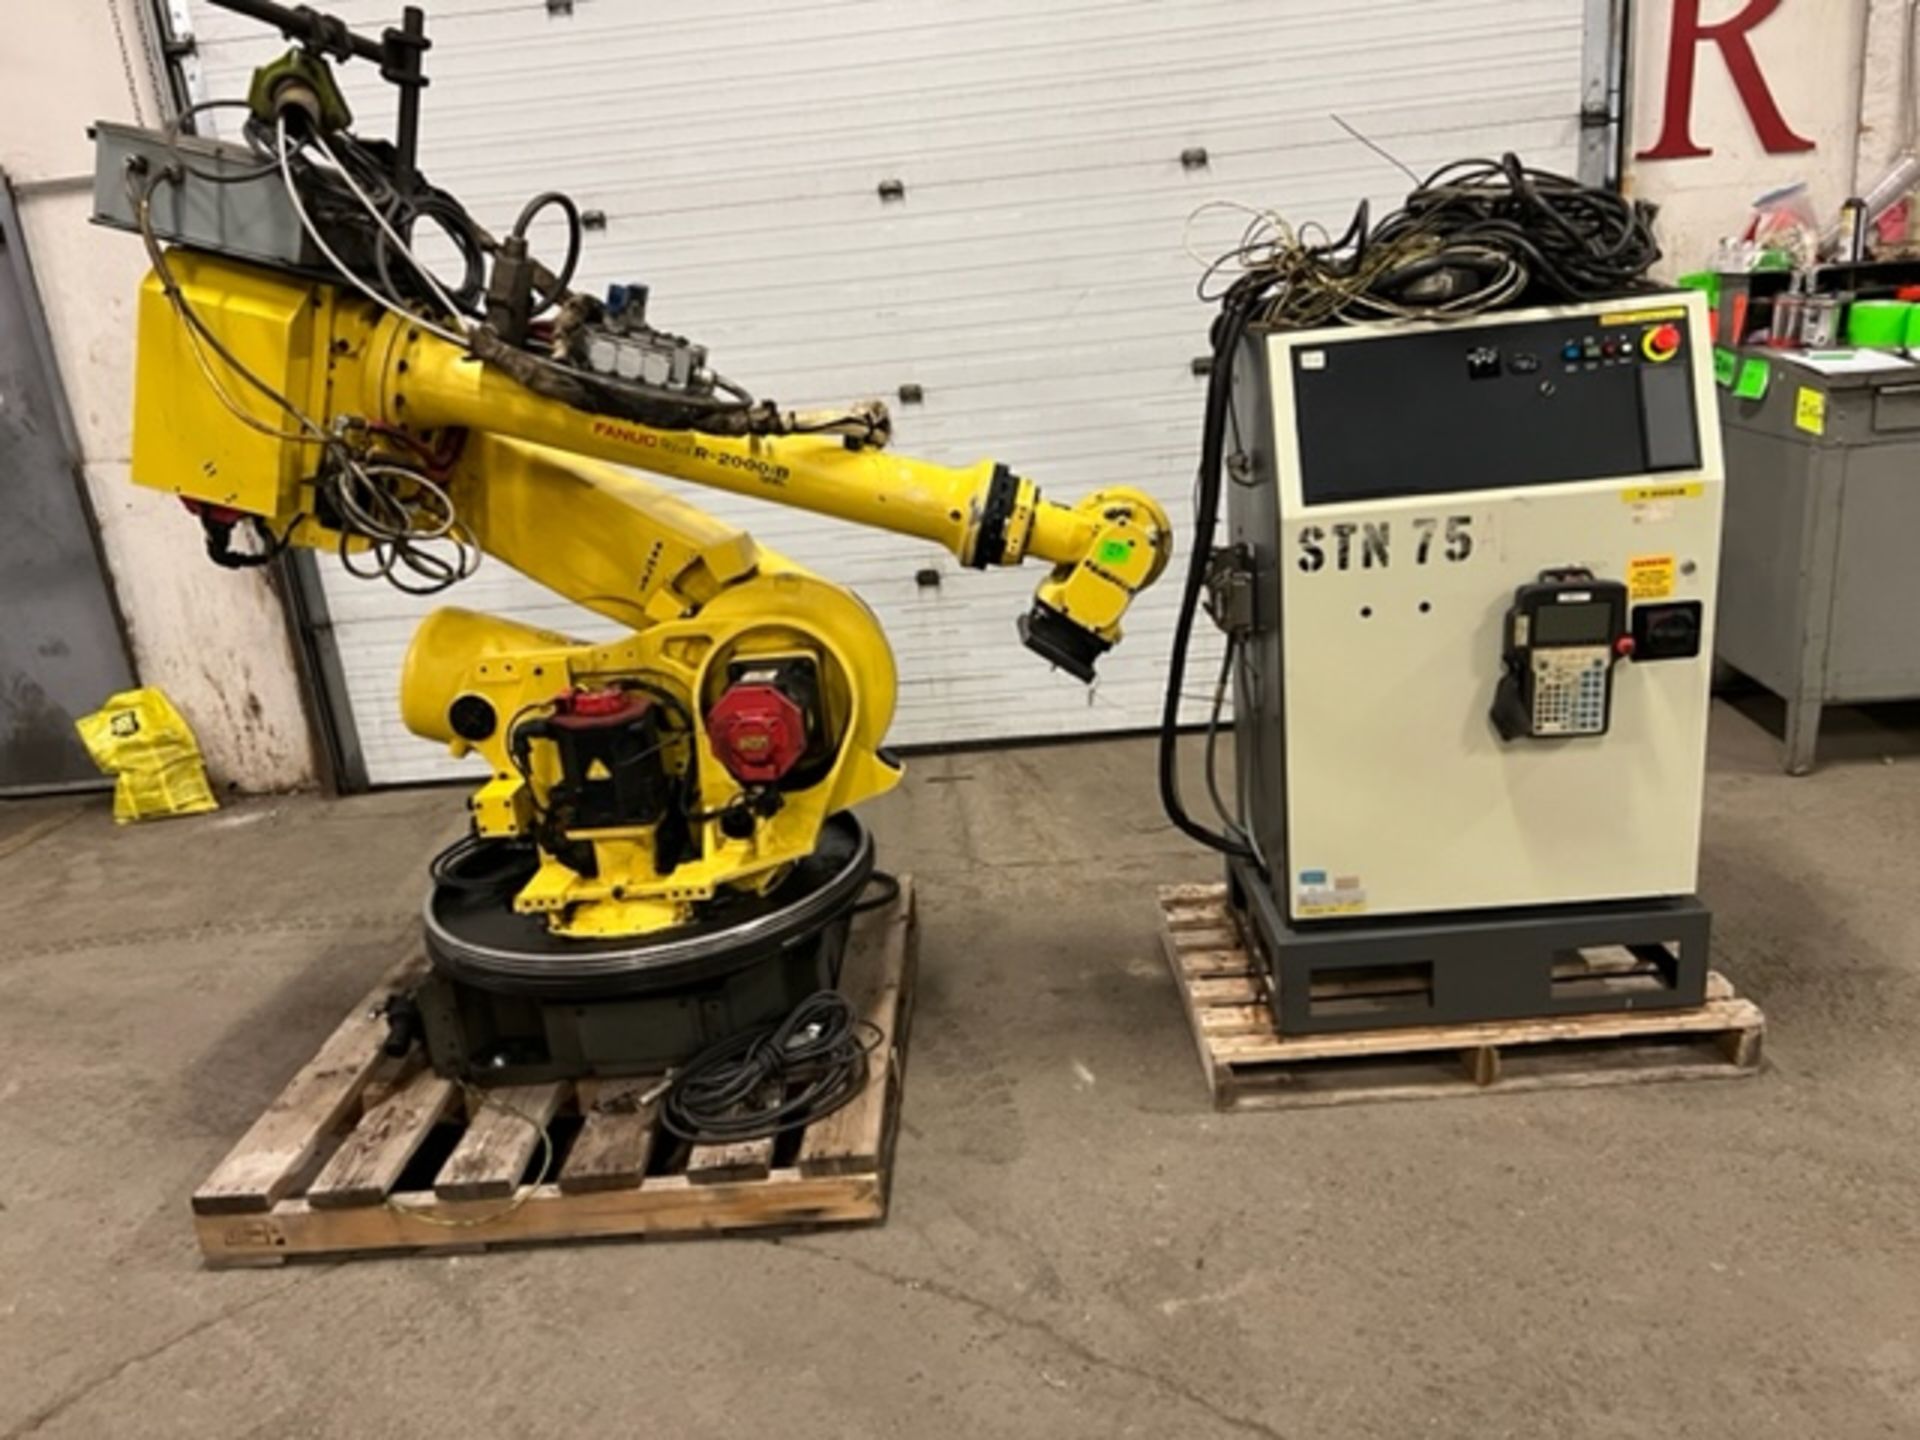 MINT 2009 Fanuc Handling Robot Model R-2000iB 125L - 125kg payload with R-30iA Controller and